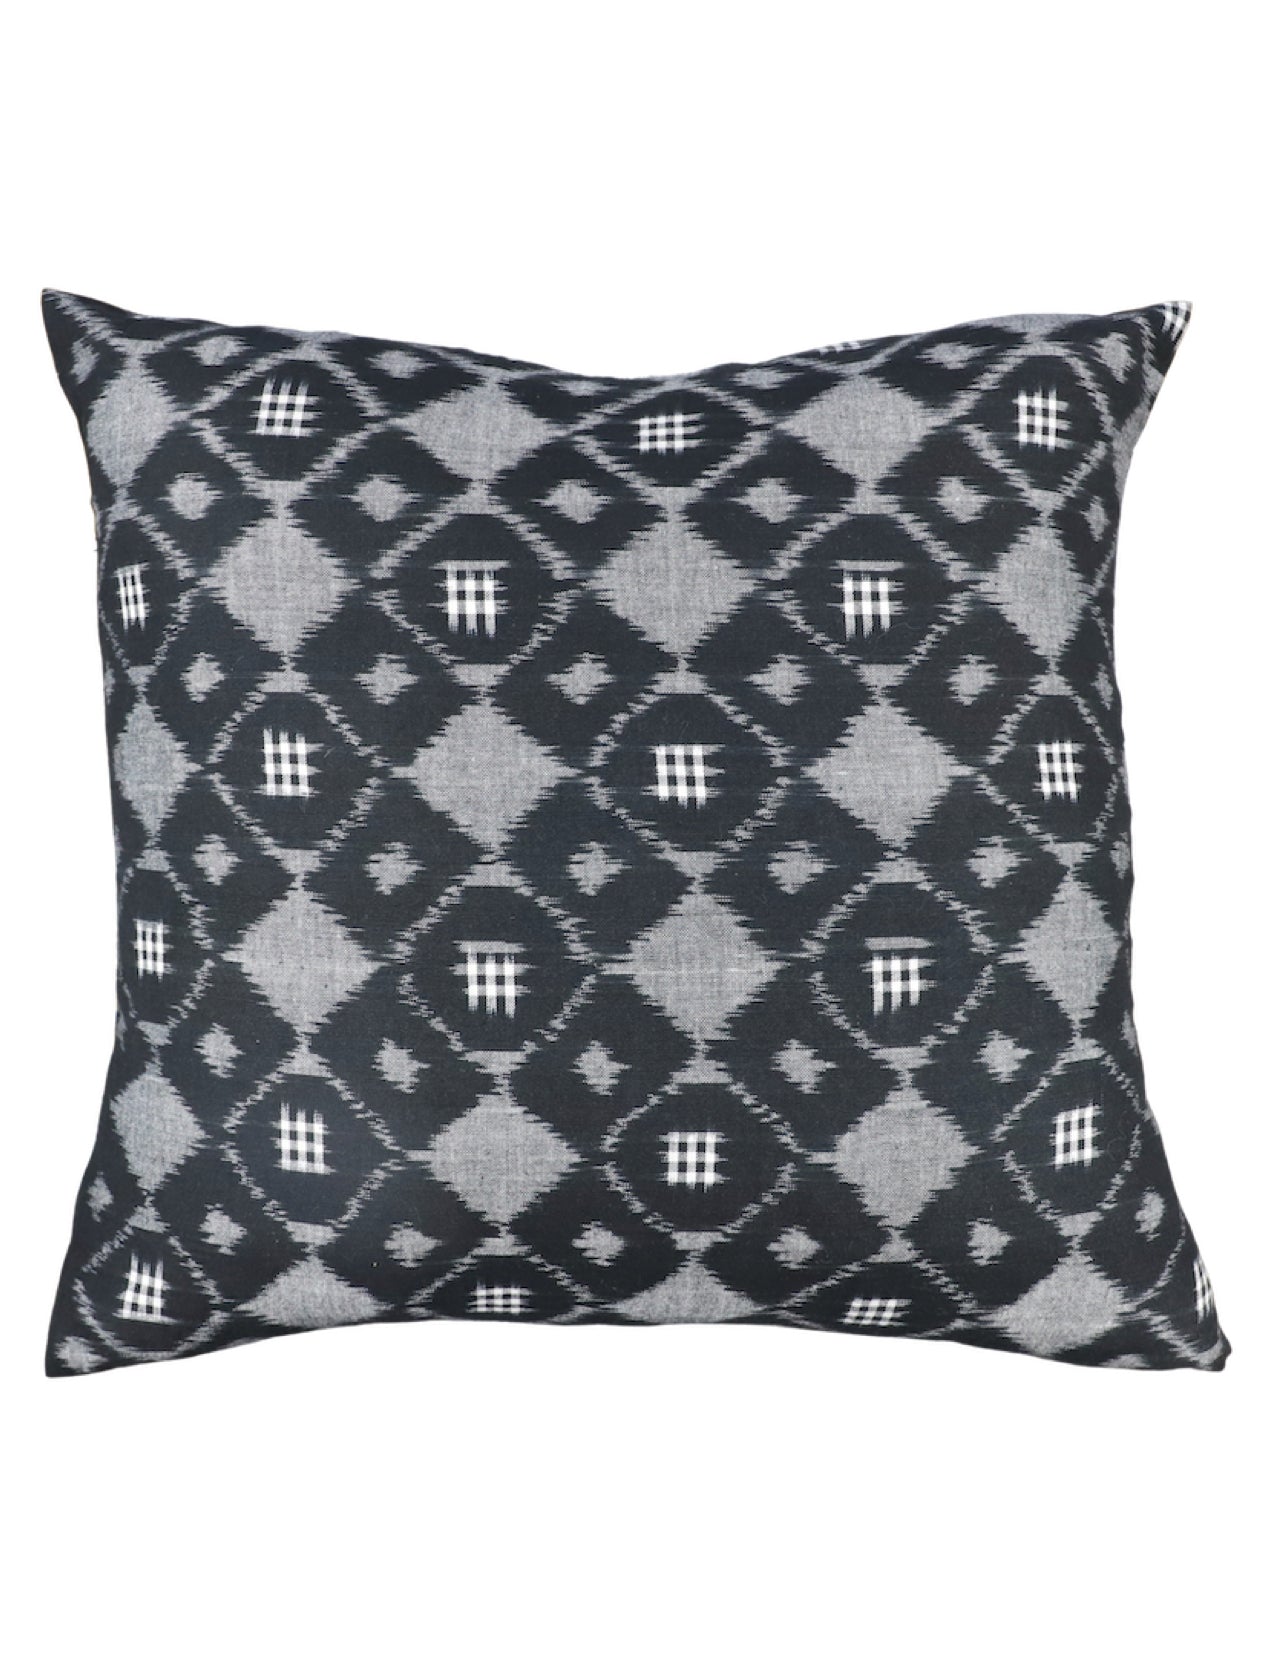 Chester Throw Pillow Cover - Passion Lilie - Fair Trade - Sustainable Fashion